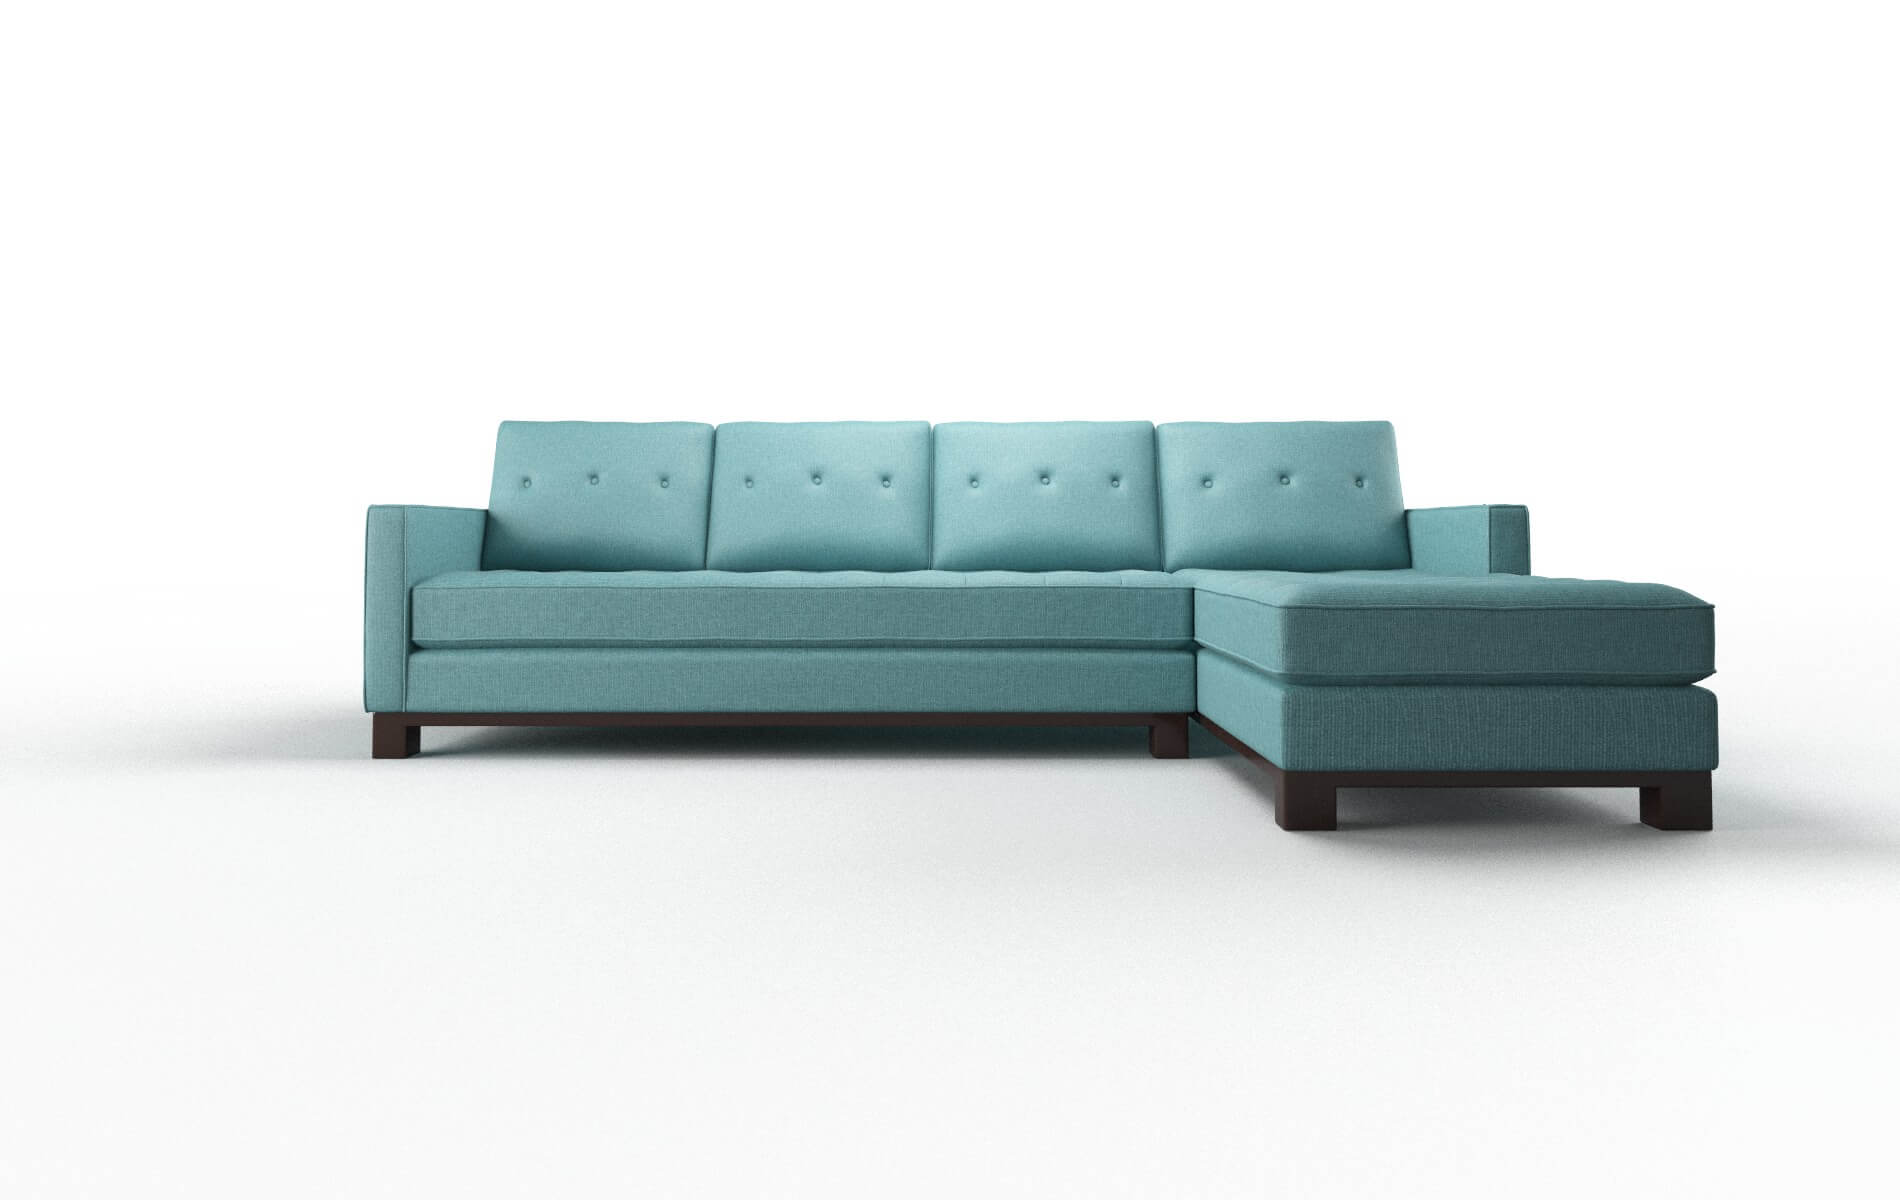 Syros Parker Turquoise chair espresso legs